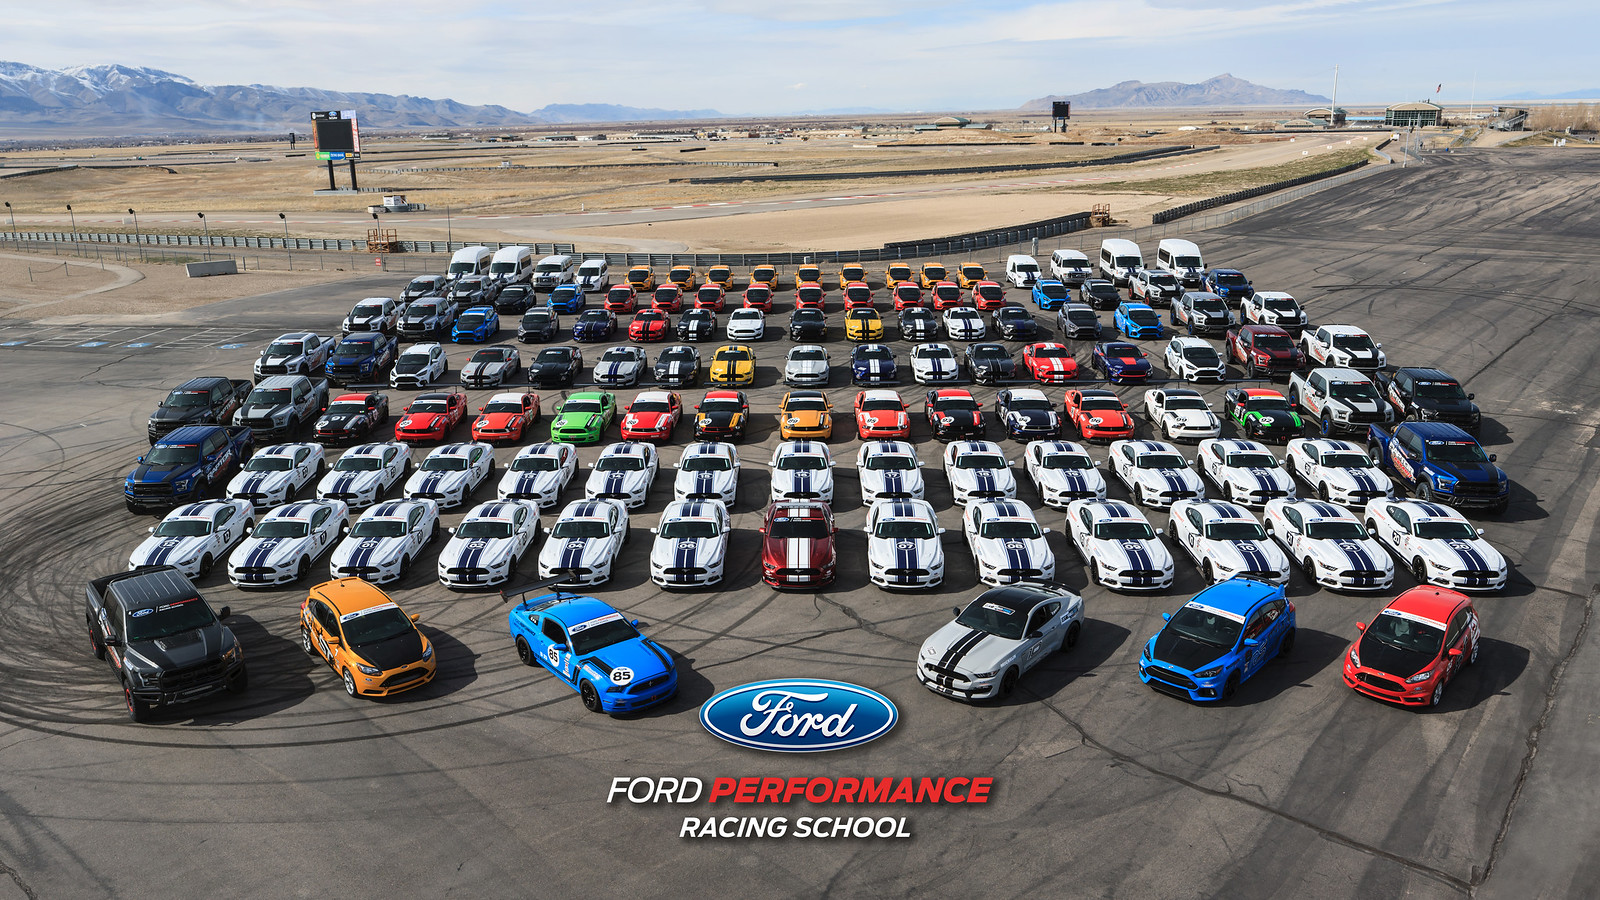 Ford Performance Racing School splitting into pavement and off-road